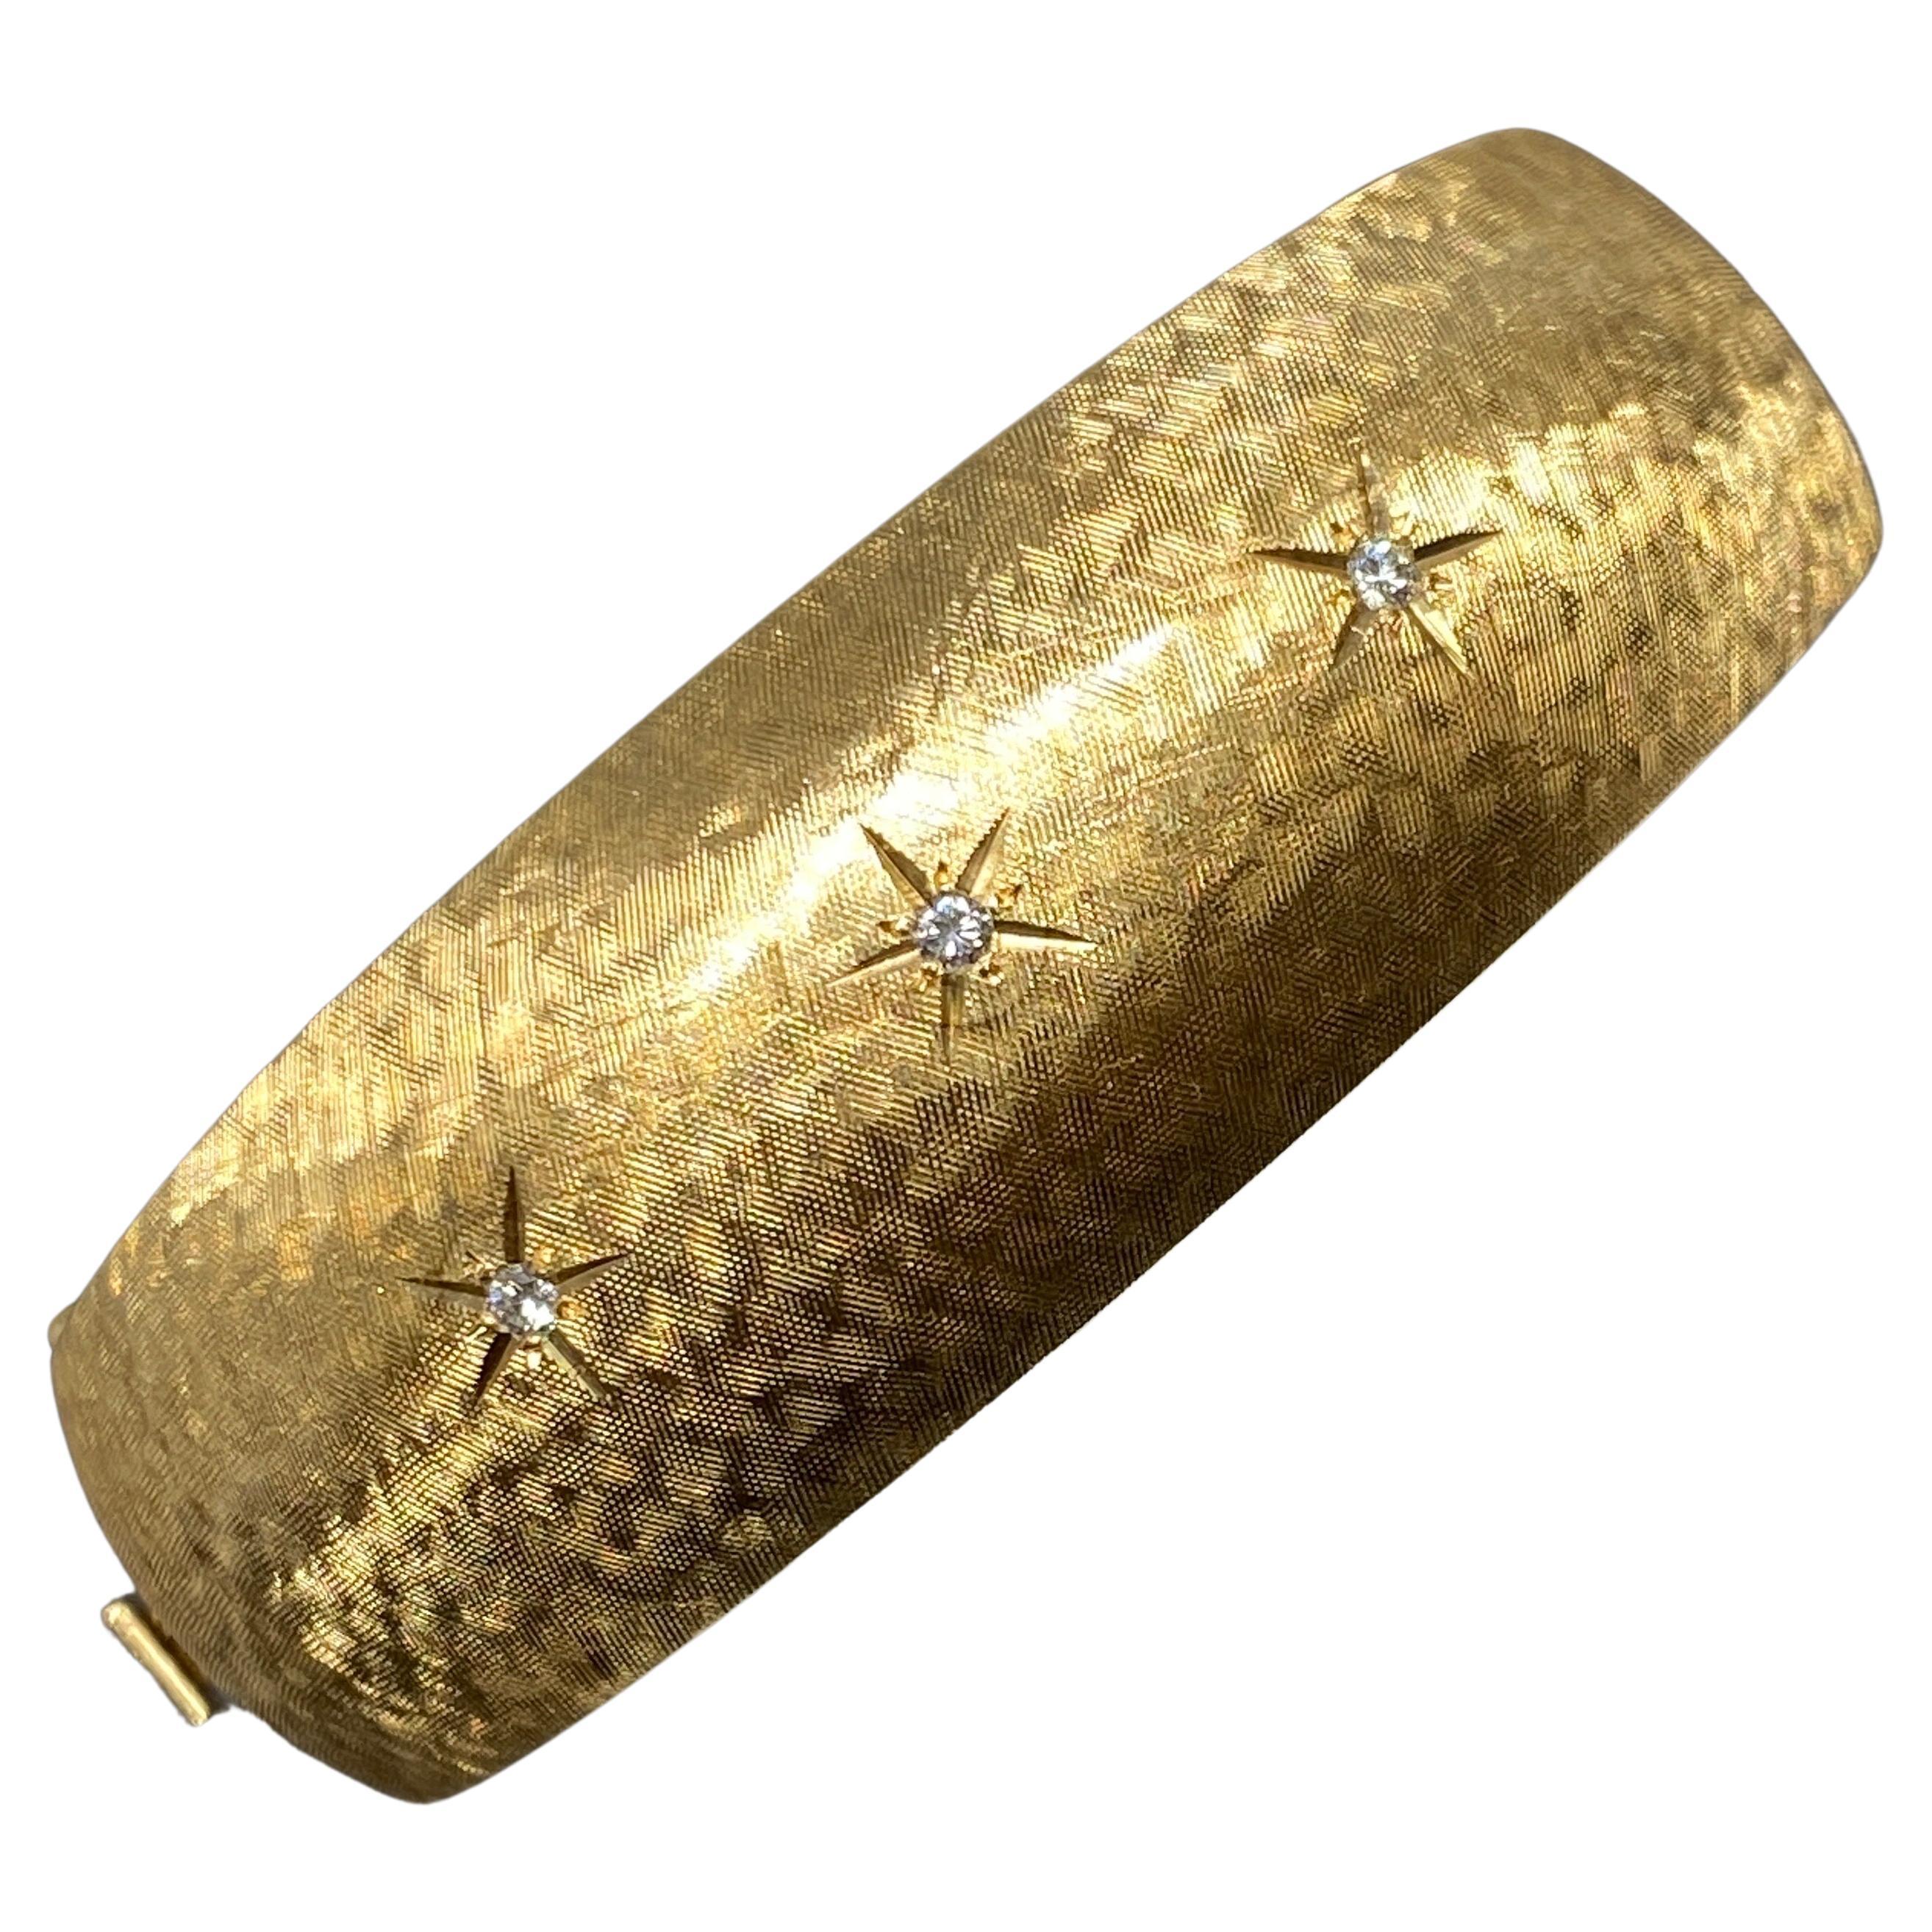 Up for your consideration is this fantastic heavy 14kt yellow gold hinged bangle bracelet circa 1960's.

This big, bold, and beautiful wide convex wrist bangle, is crafted in gleaming 14K yellow gold in a stunning florentine  textured finish.  The